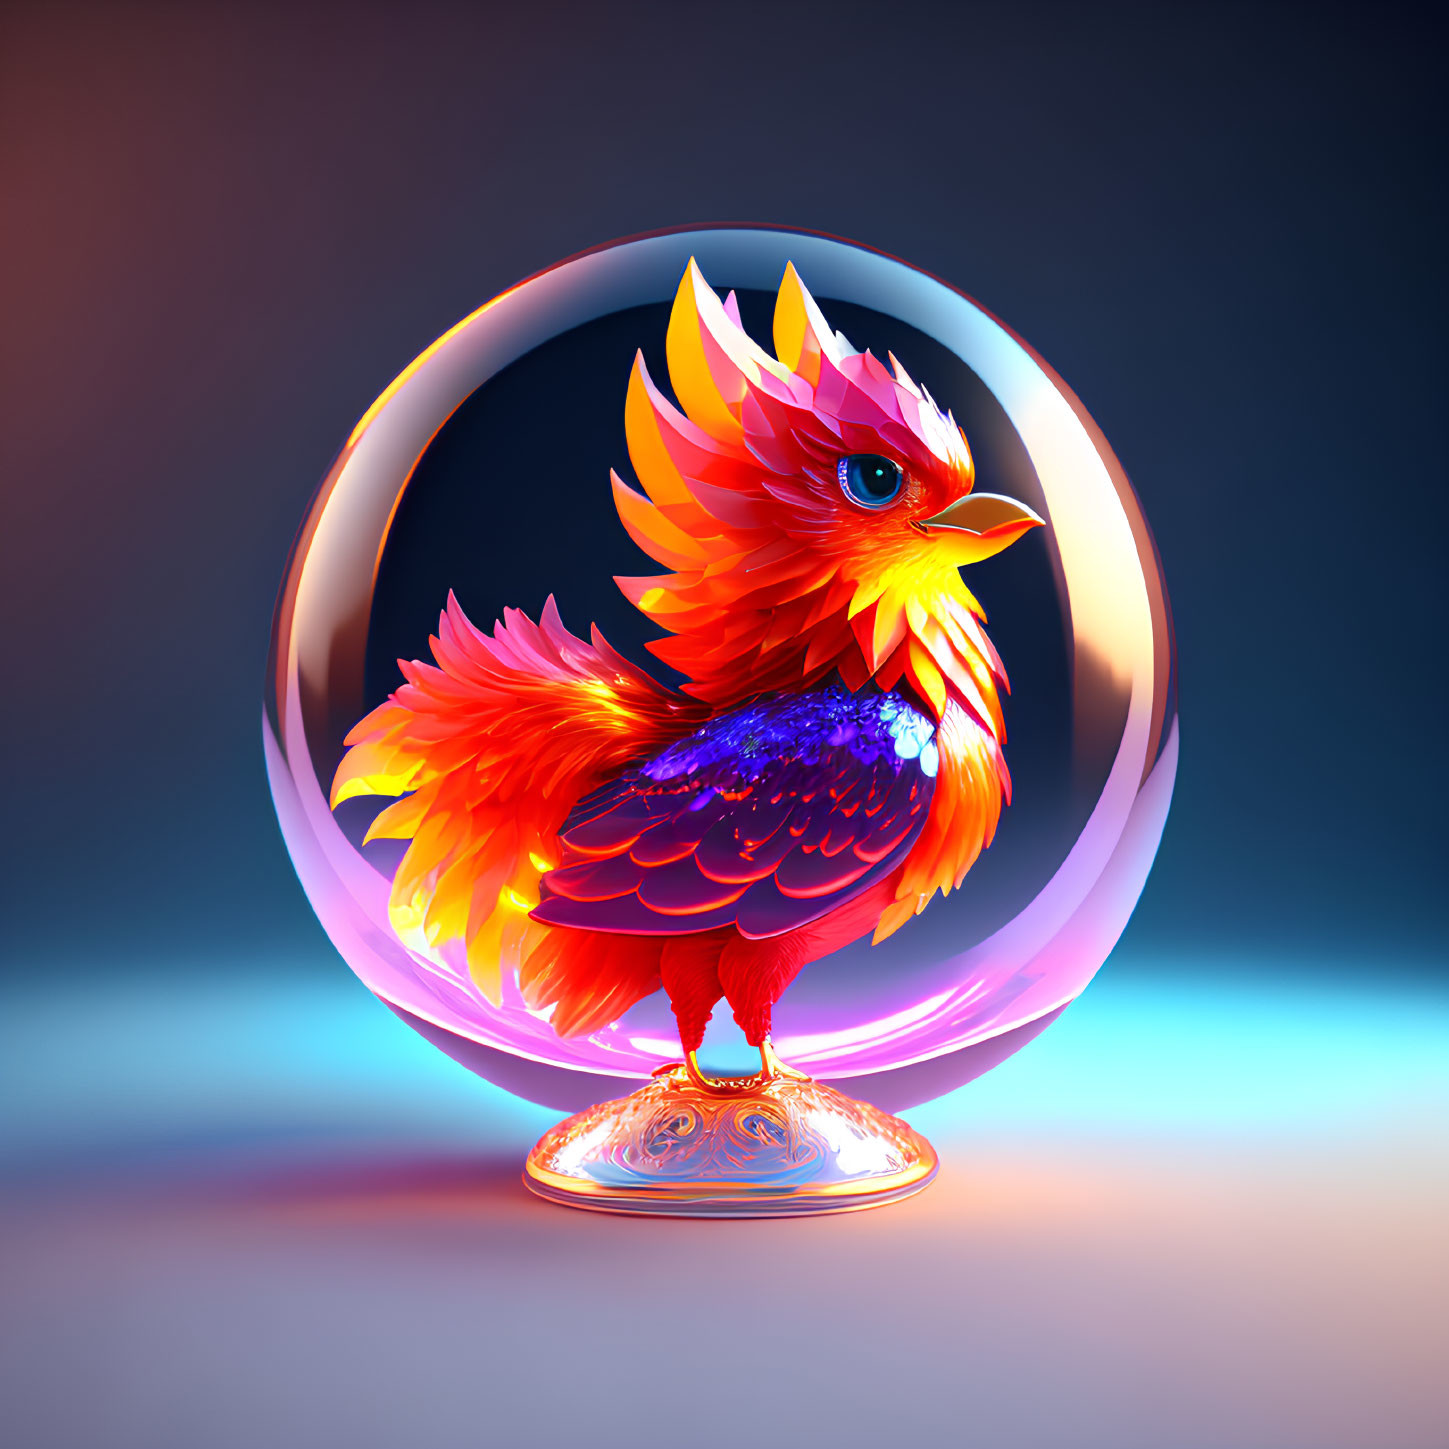 Colorful Mythical Bird Illustration in Glass Orb on Pedestal